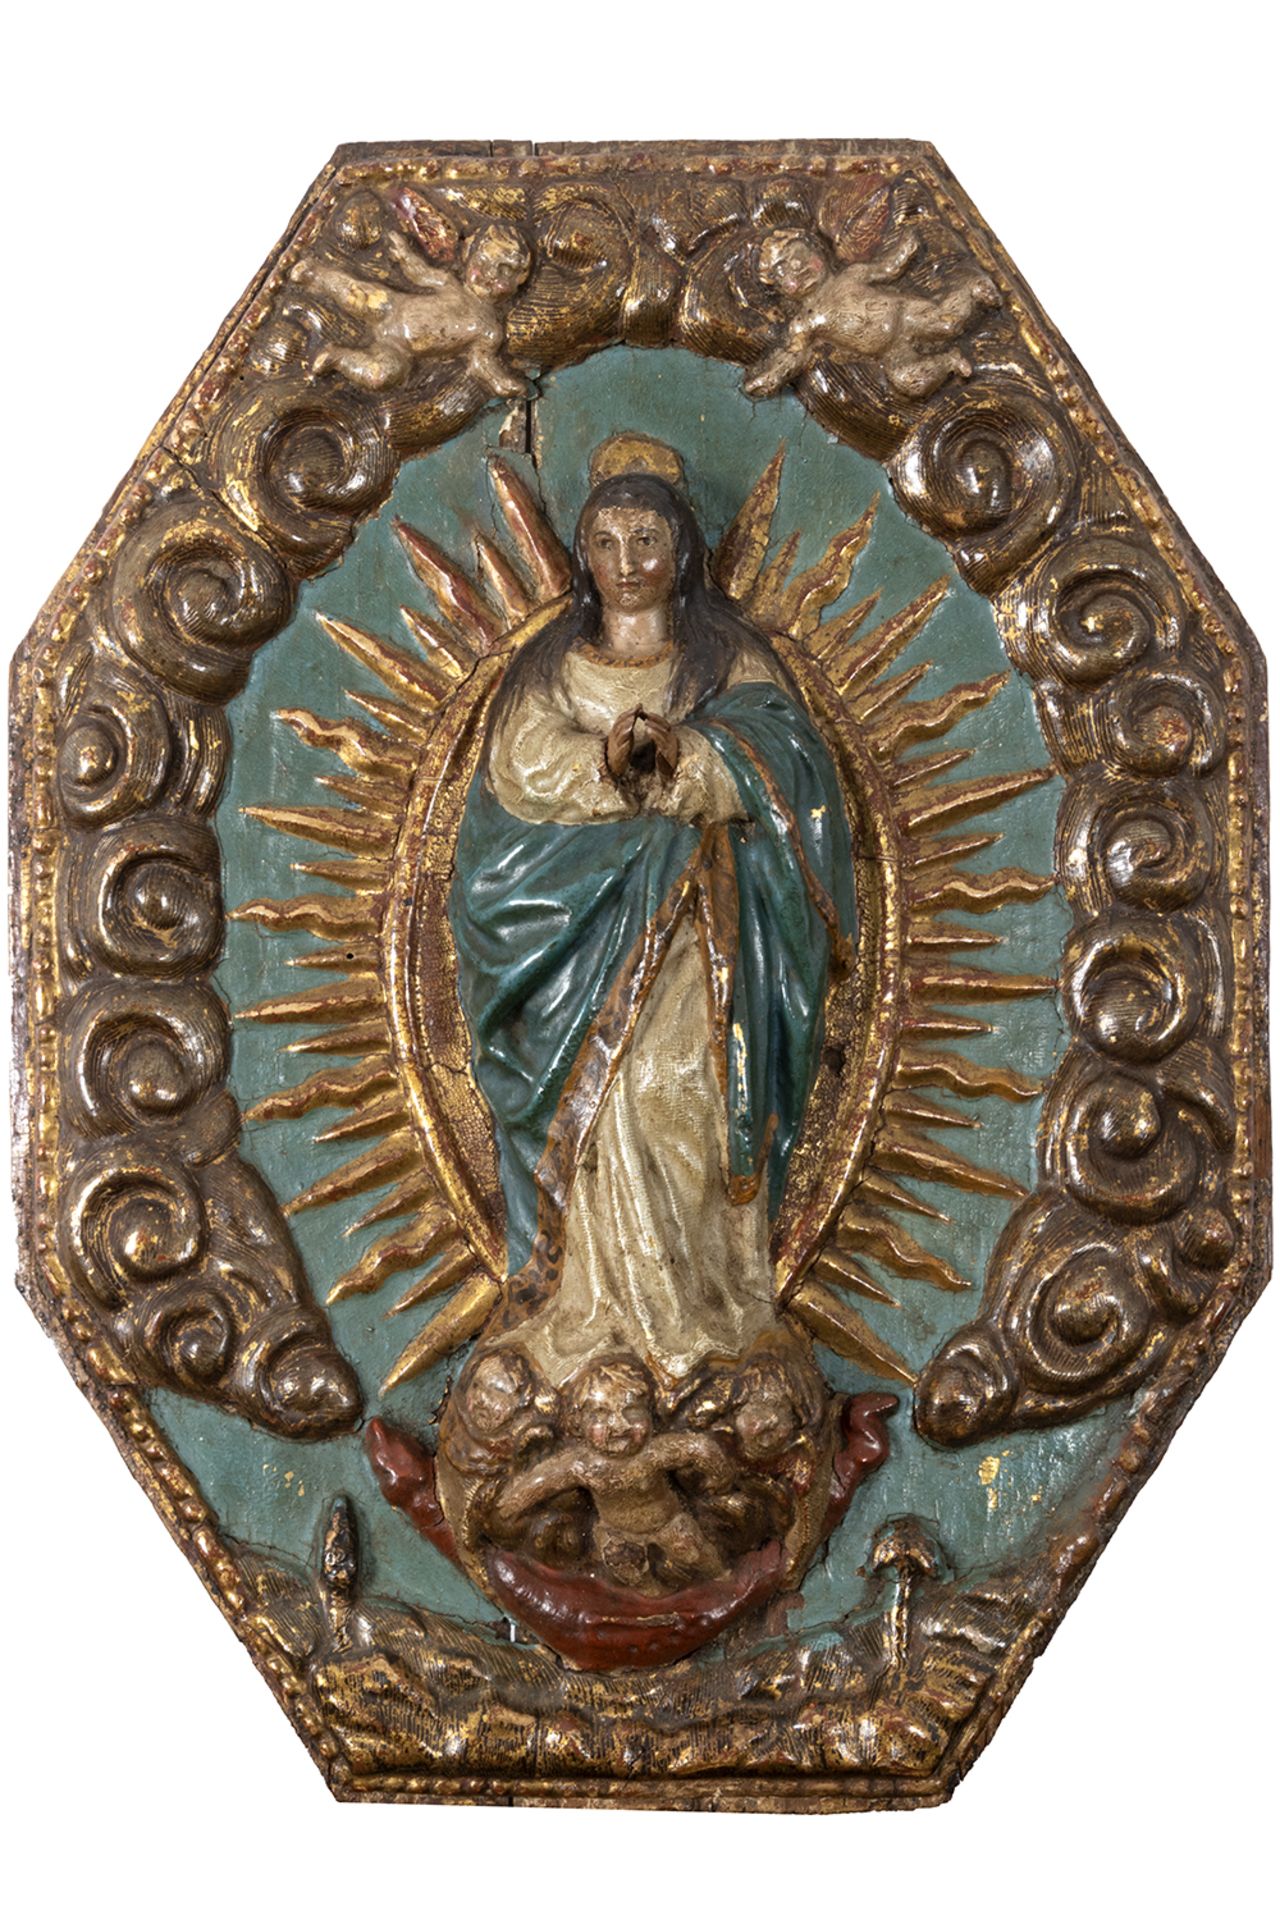 Colonial school, Mexico, 18th century. Guadalupe's Virgin.